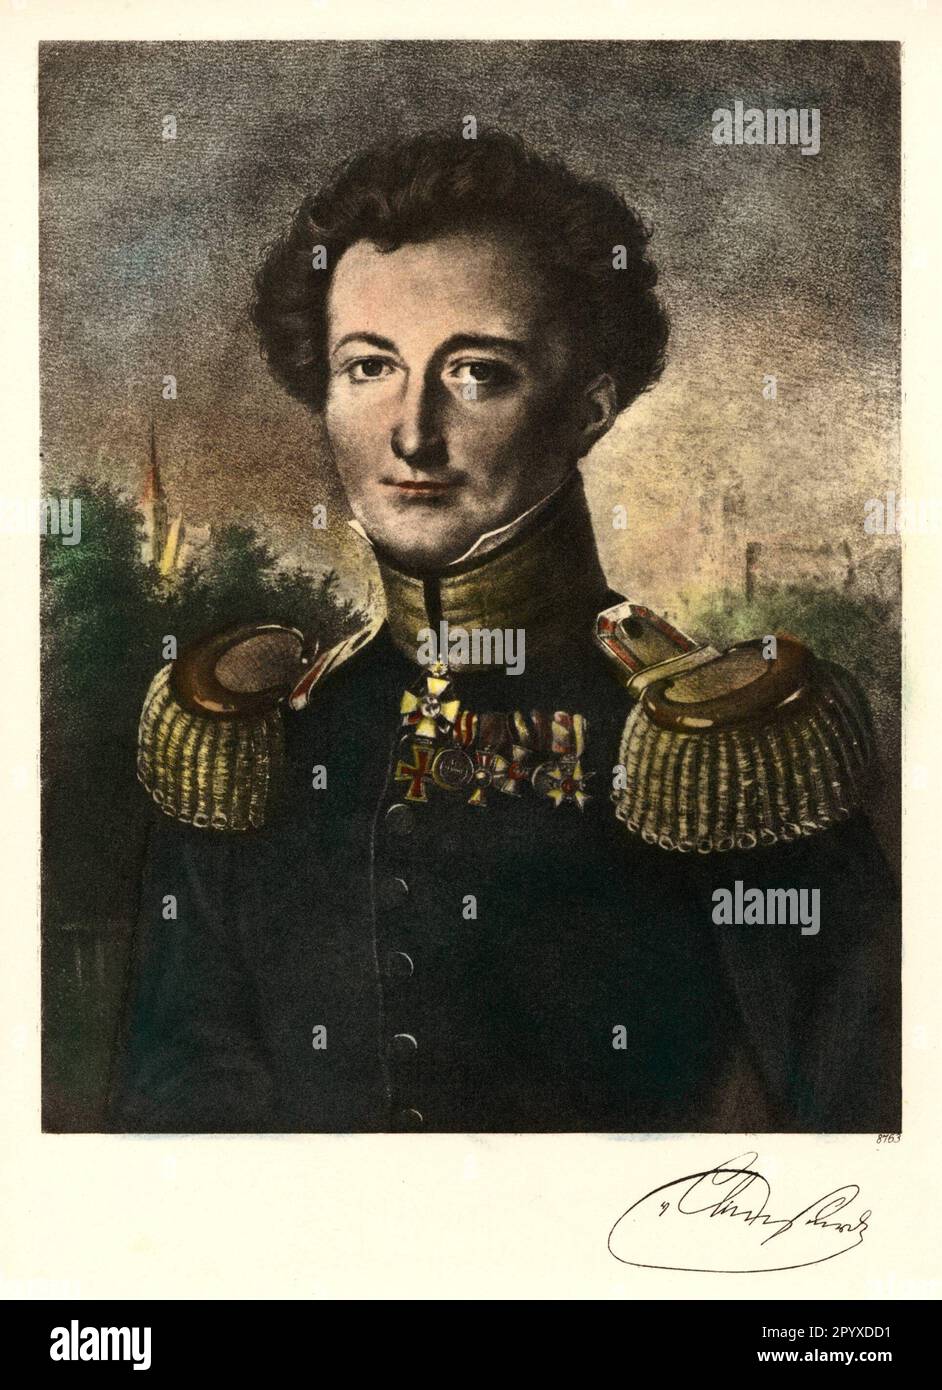 Carl von Clausewitz (1780-1831), Prussian general and military theorist. After 1808, he belonged to the circle of Prussian army reformers Scharnhorst and Gneisenau. With his work Vom Kriege (On War), he became the founder of modern war theory. Painting after a contemporary lithograph. Photo: Heliogravure, Corpus Imaginum, Hanfstaengl Collection. [automated translation] Stock Photo